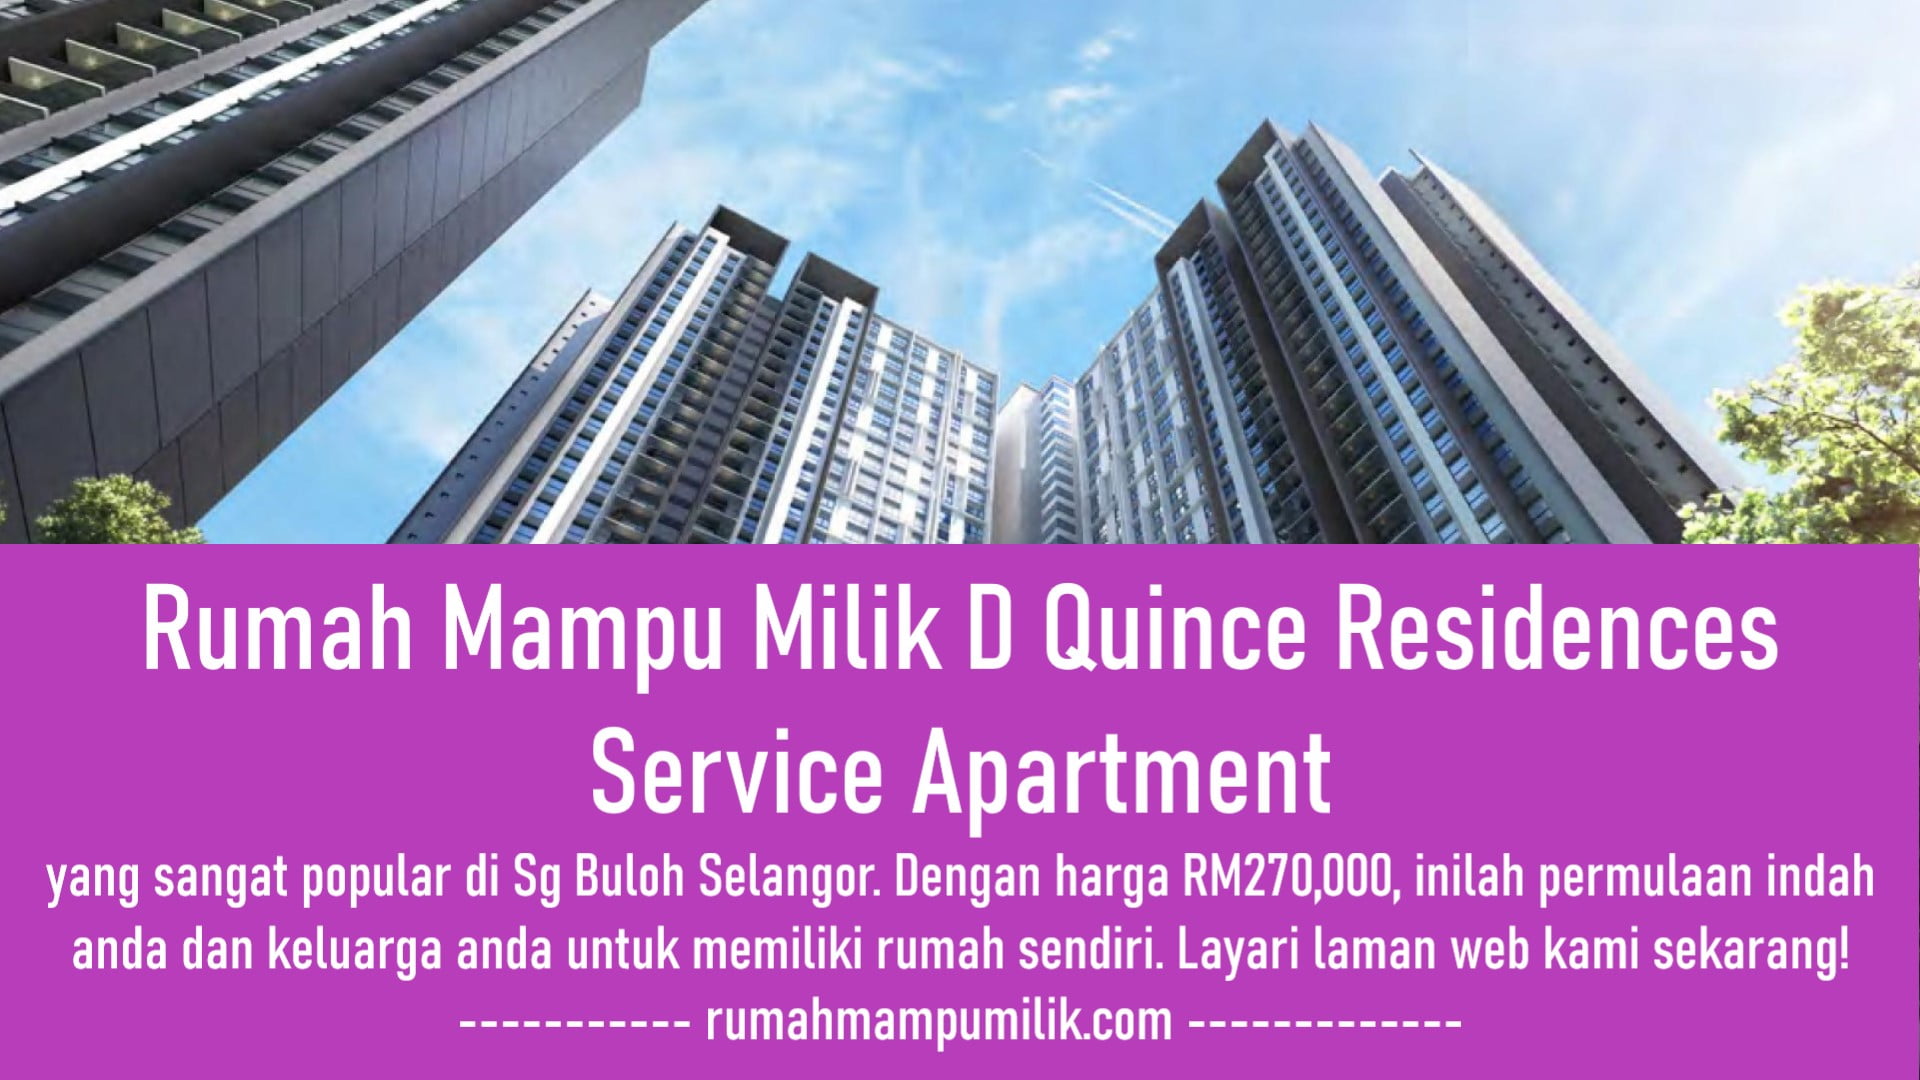 D Quince Residences Service Apartment: Affordable Homes